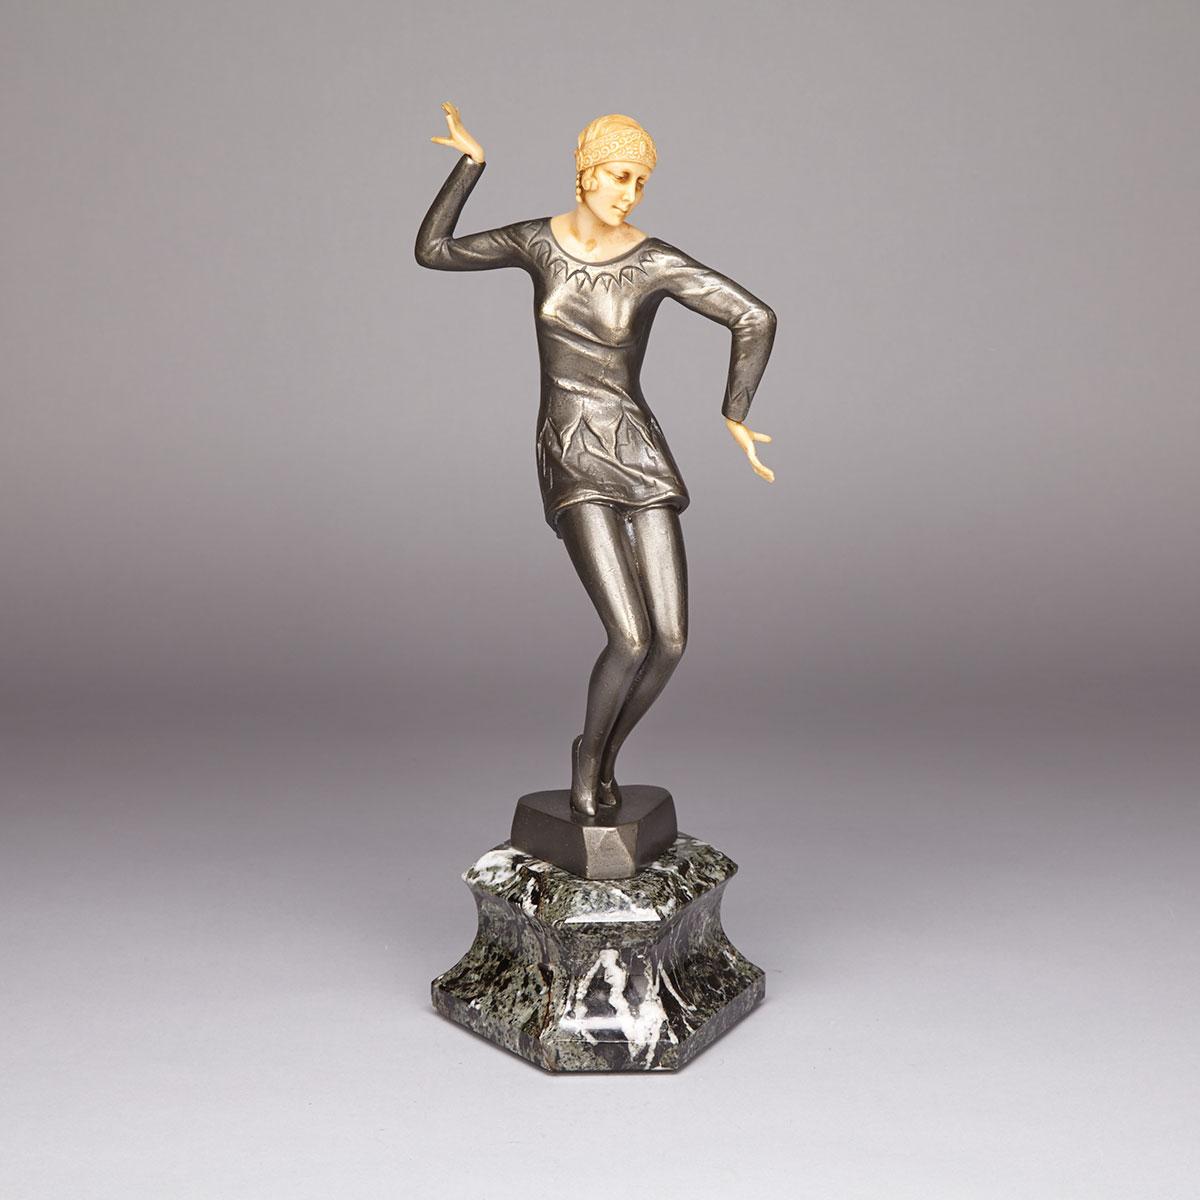 French Art Deco Style White Metal Figure of a Dancer, late 20th century